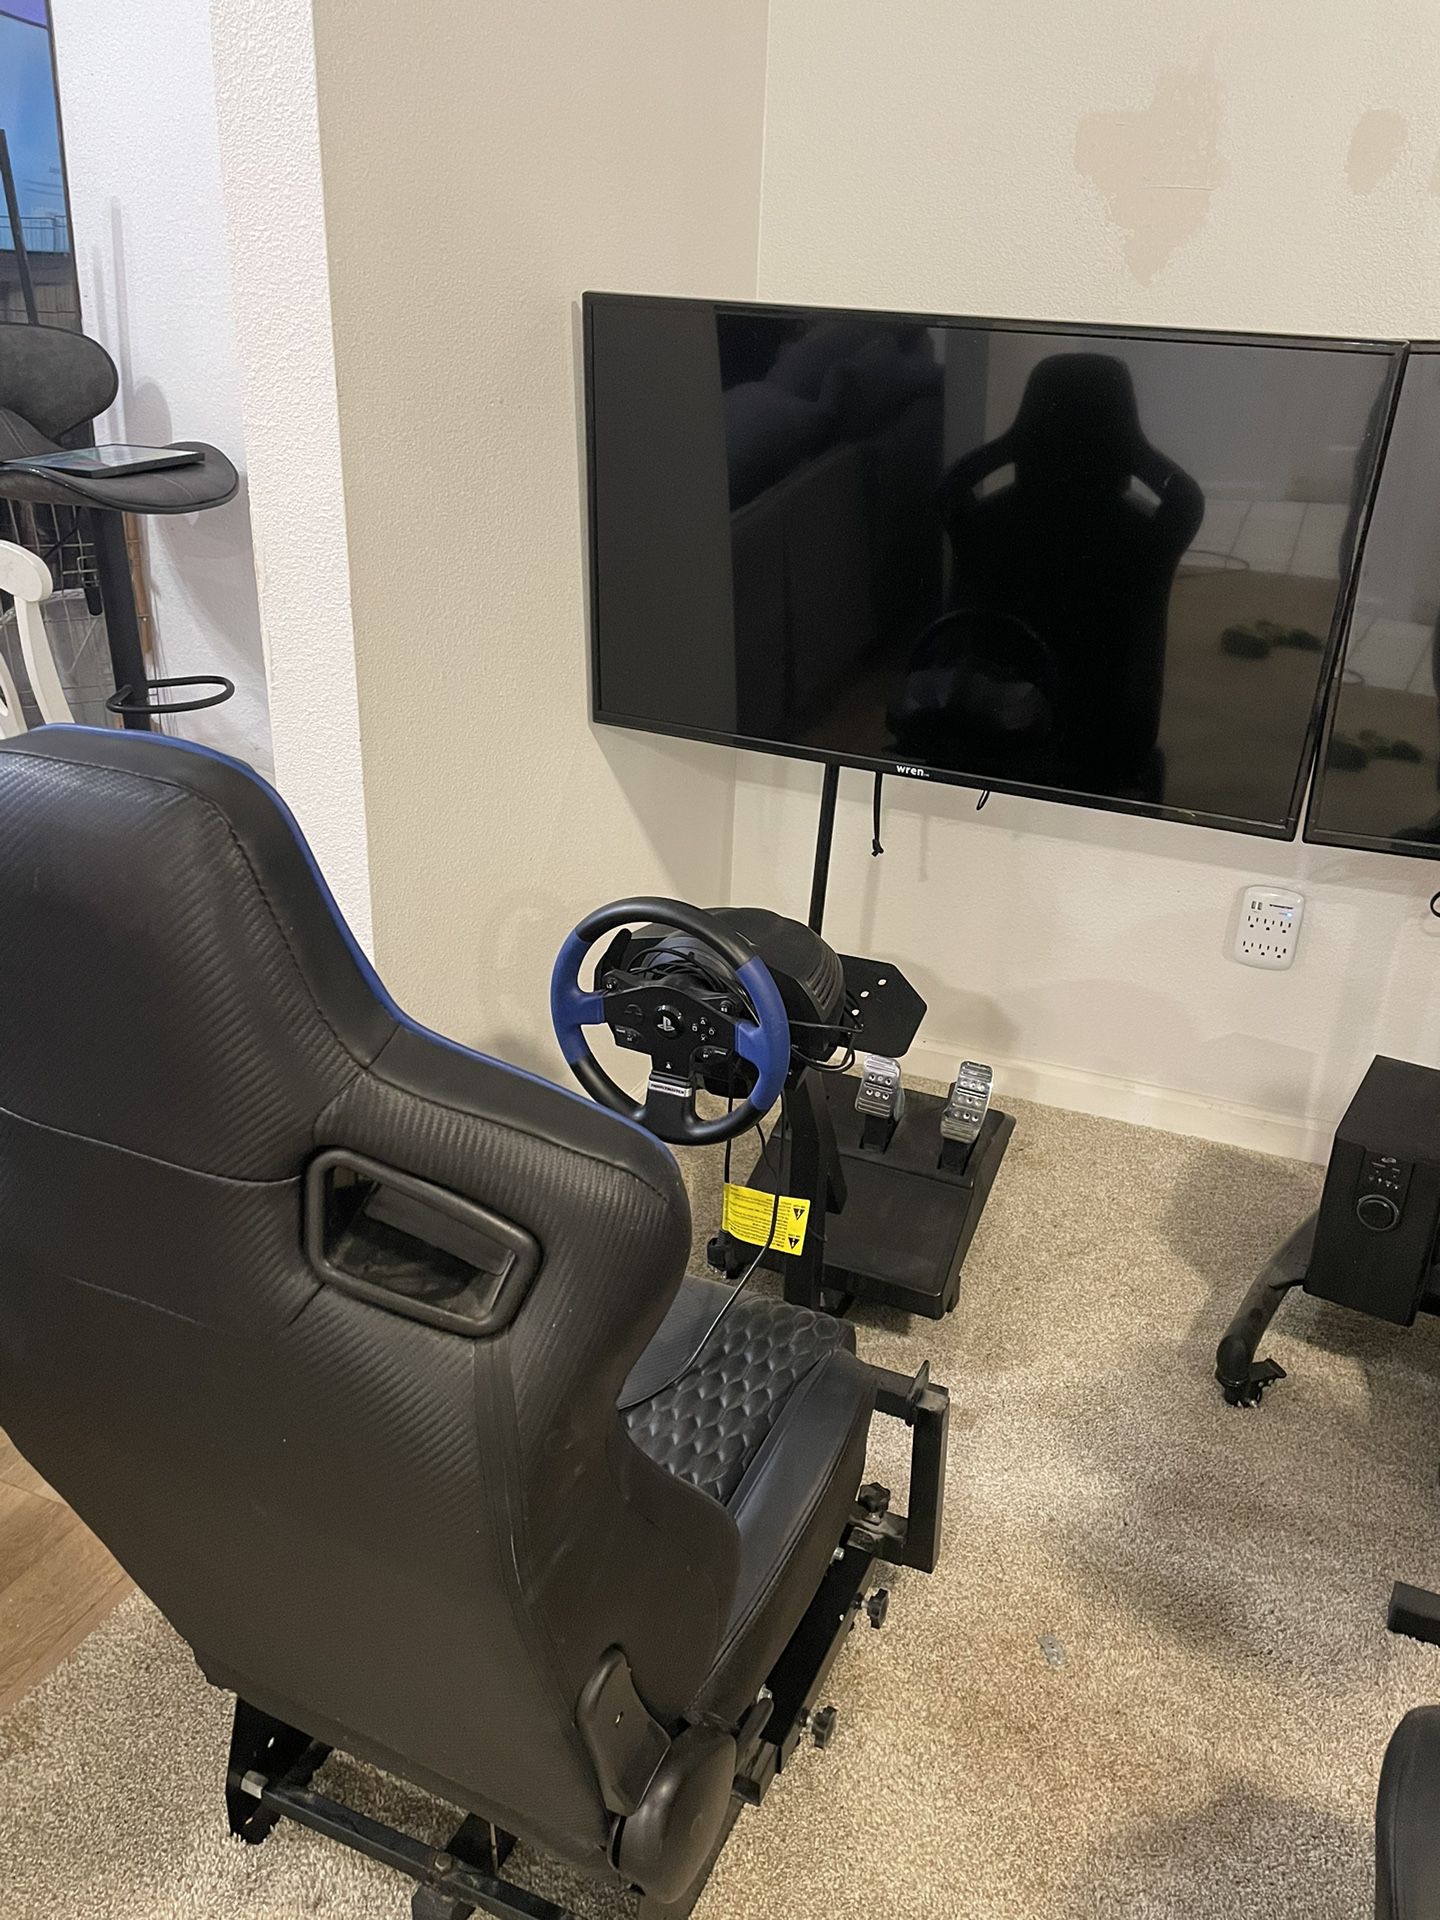 Full Sim Rig, Sim Racer Thrustmaster T150 Pro Wheel And Pedals